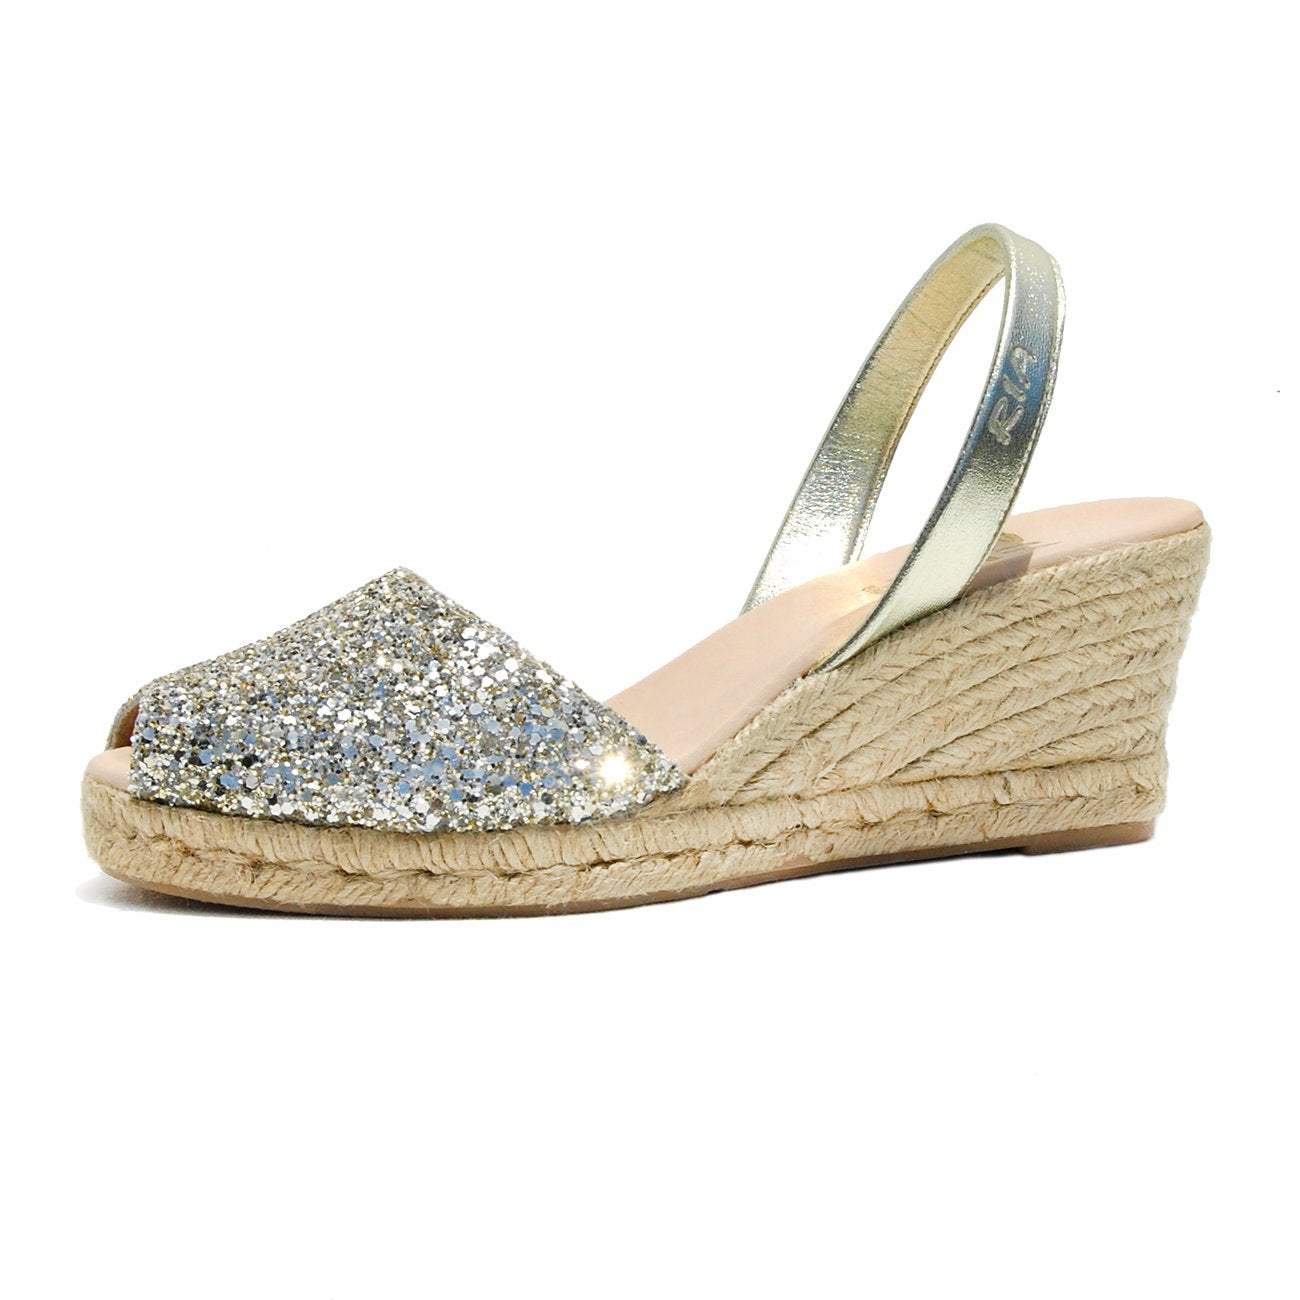 Parallel Culture Shoes and Fashion Online WEDGES RIA MENORCA LLUNA GLITTER WEDGE CHAMPAGNE